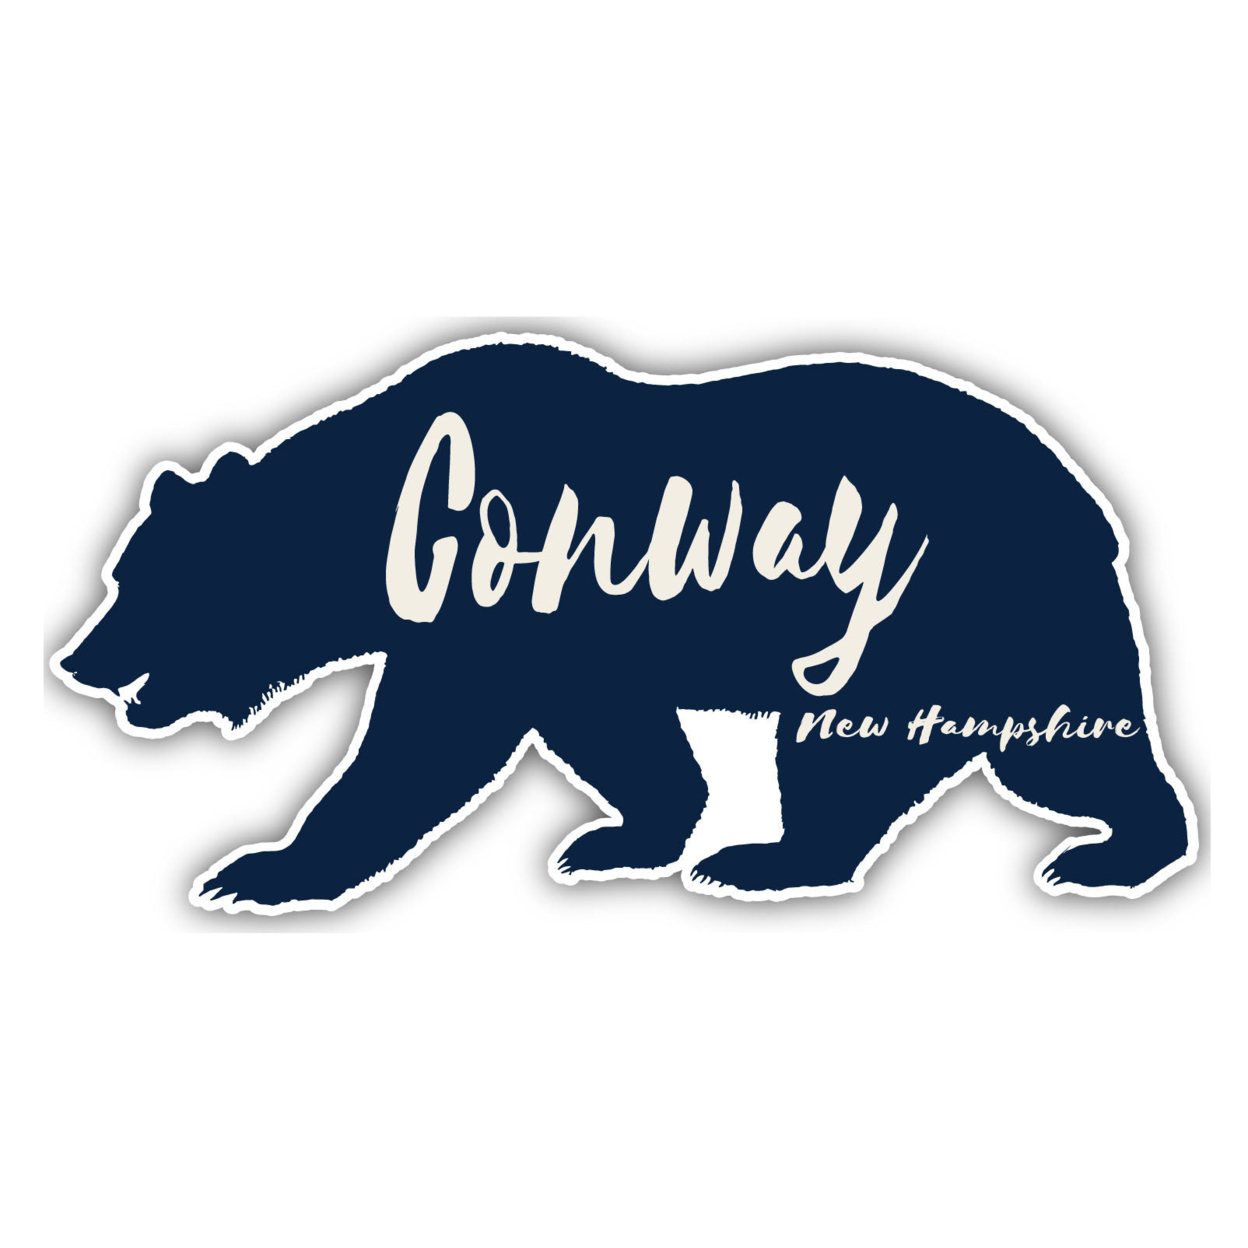 Conway New Hampshire Souvenir Decorative Stickers (Choose Theme And Size) - 4-Pack, 4-Inch, Bear